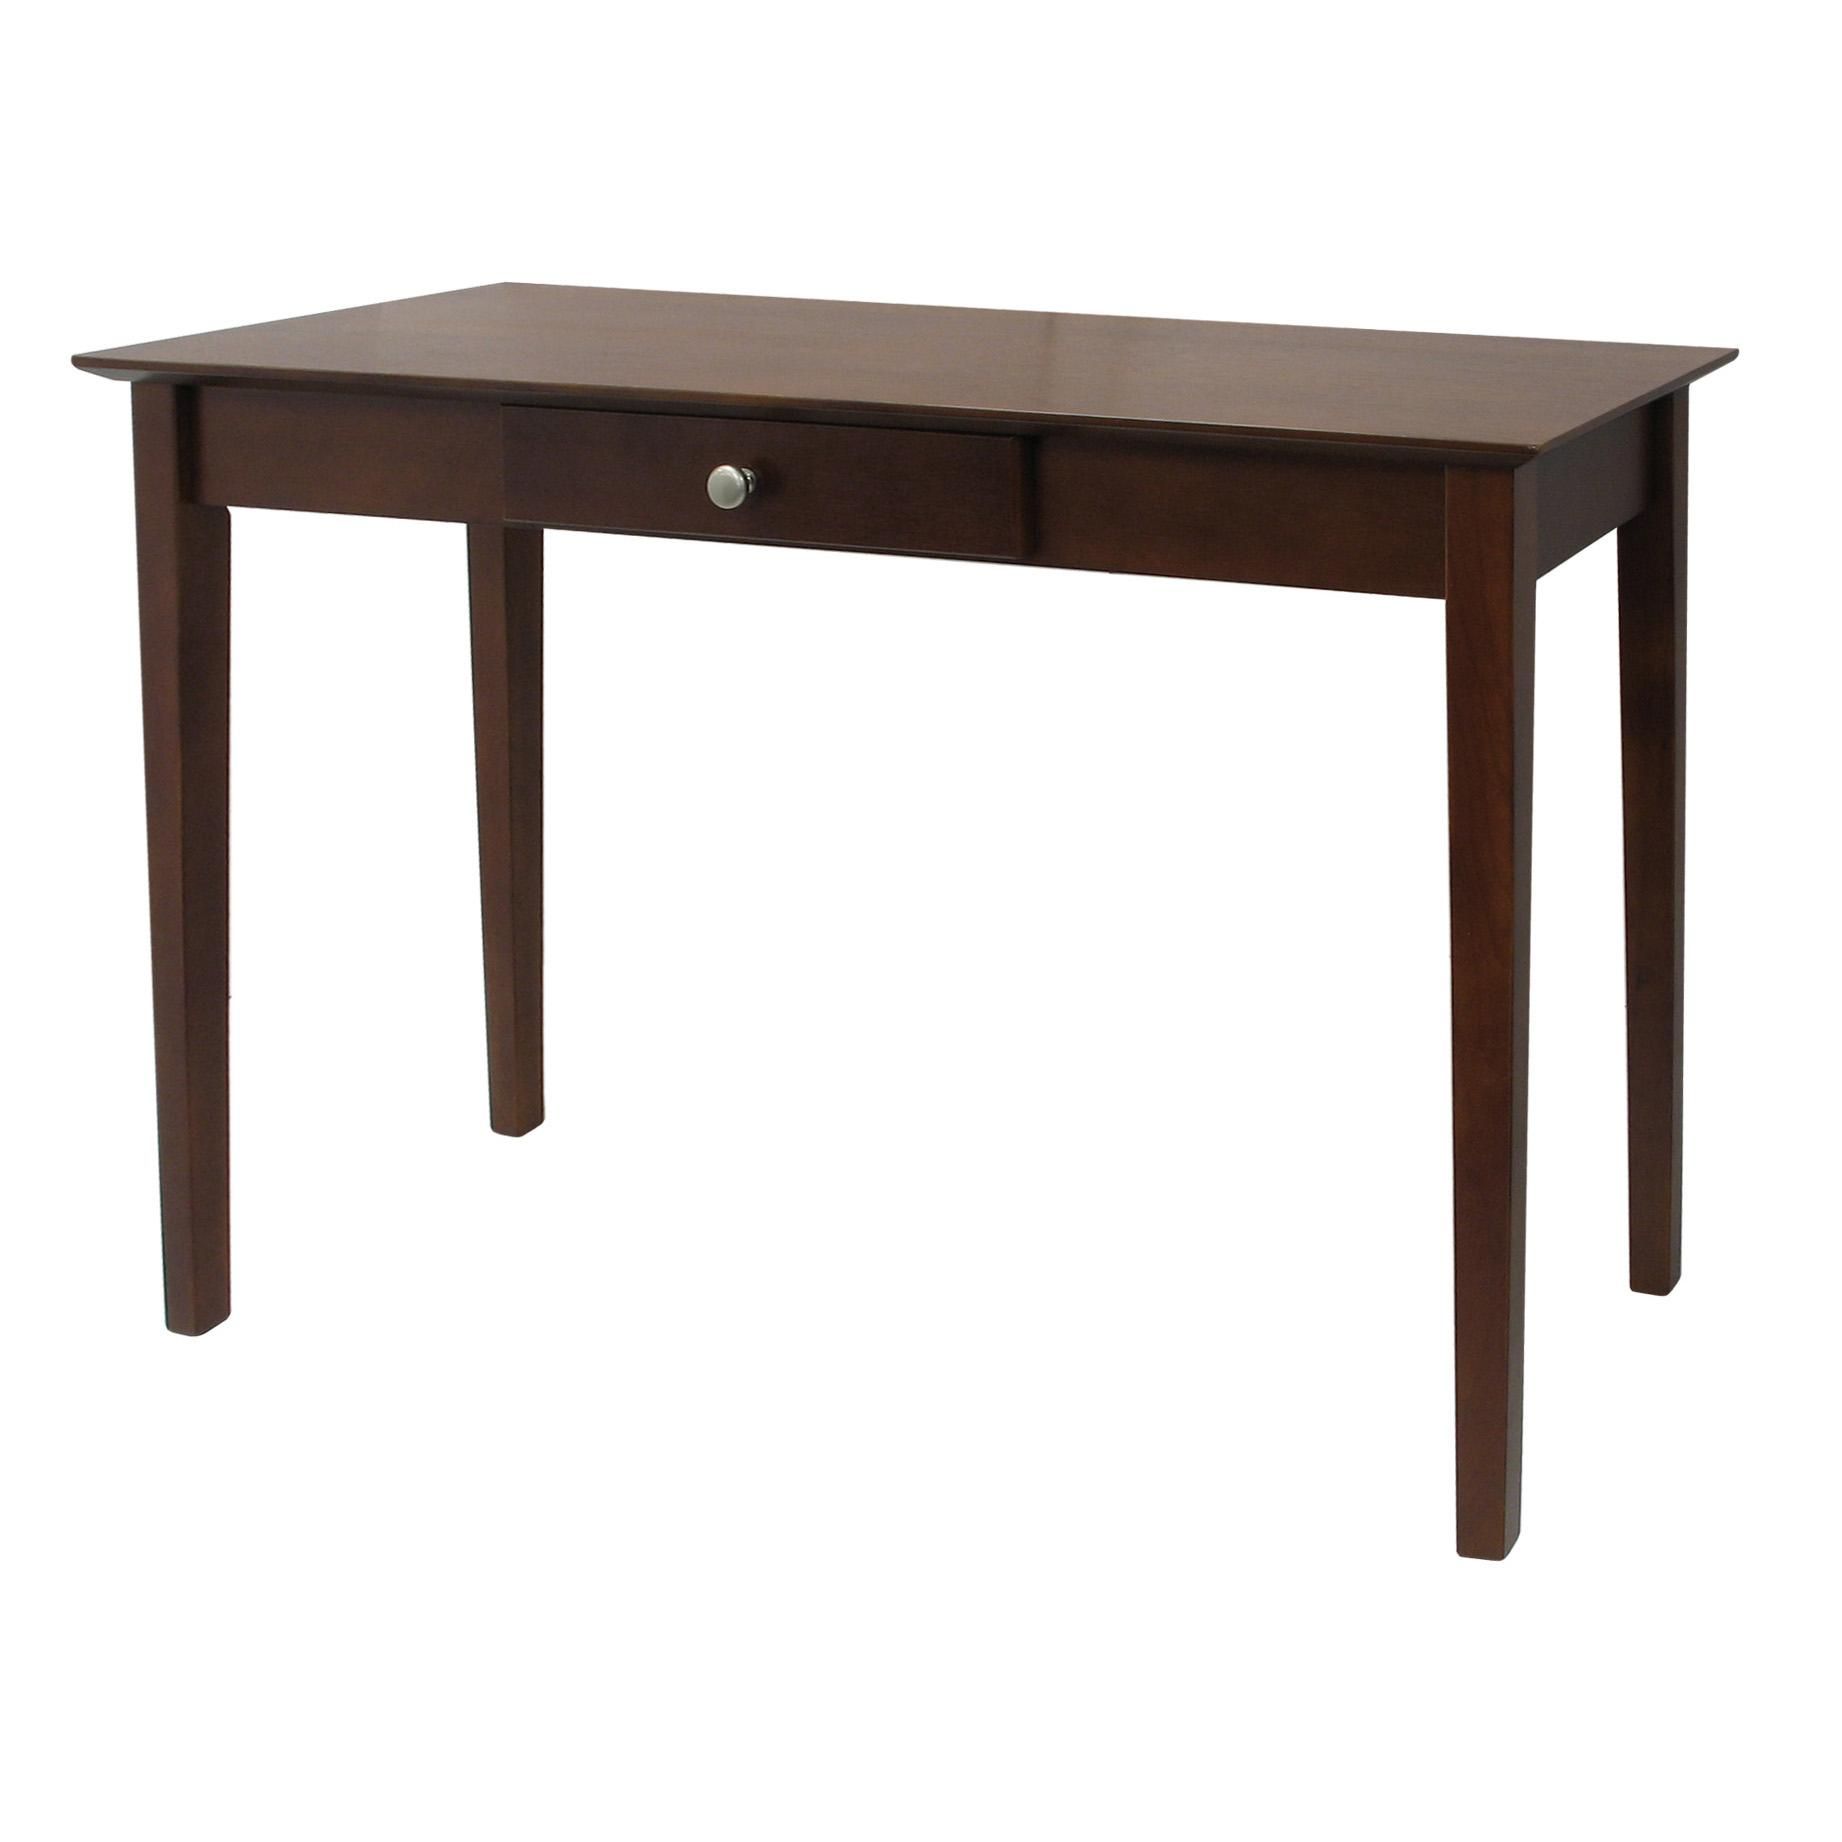 Sofa Table: Luxurious Sofa Table Desk Ideas Console Tables Ikea Intended For Parsons Walnut Top & Dark Steel Base 48x16 Console Tables (Photo 15 of 30)